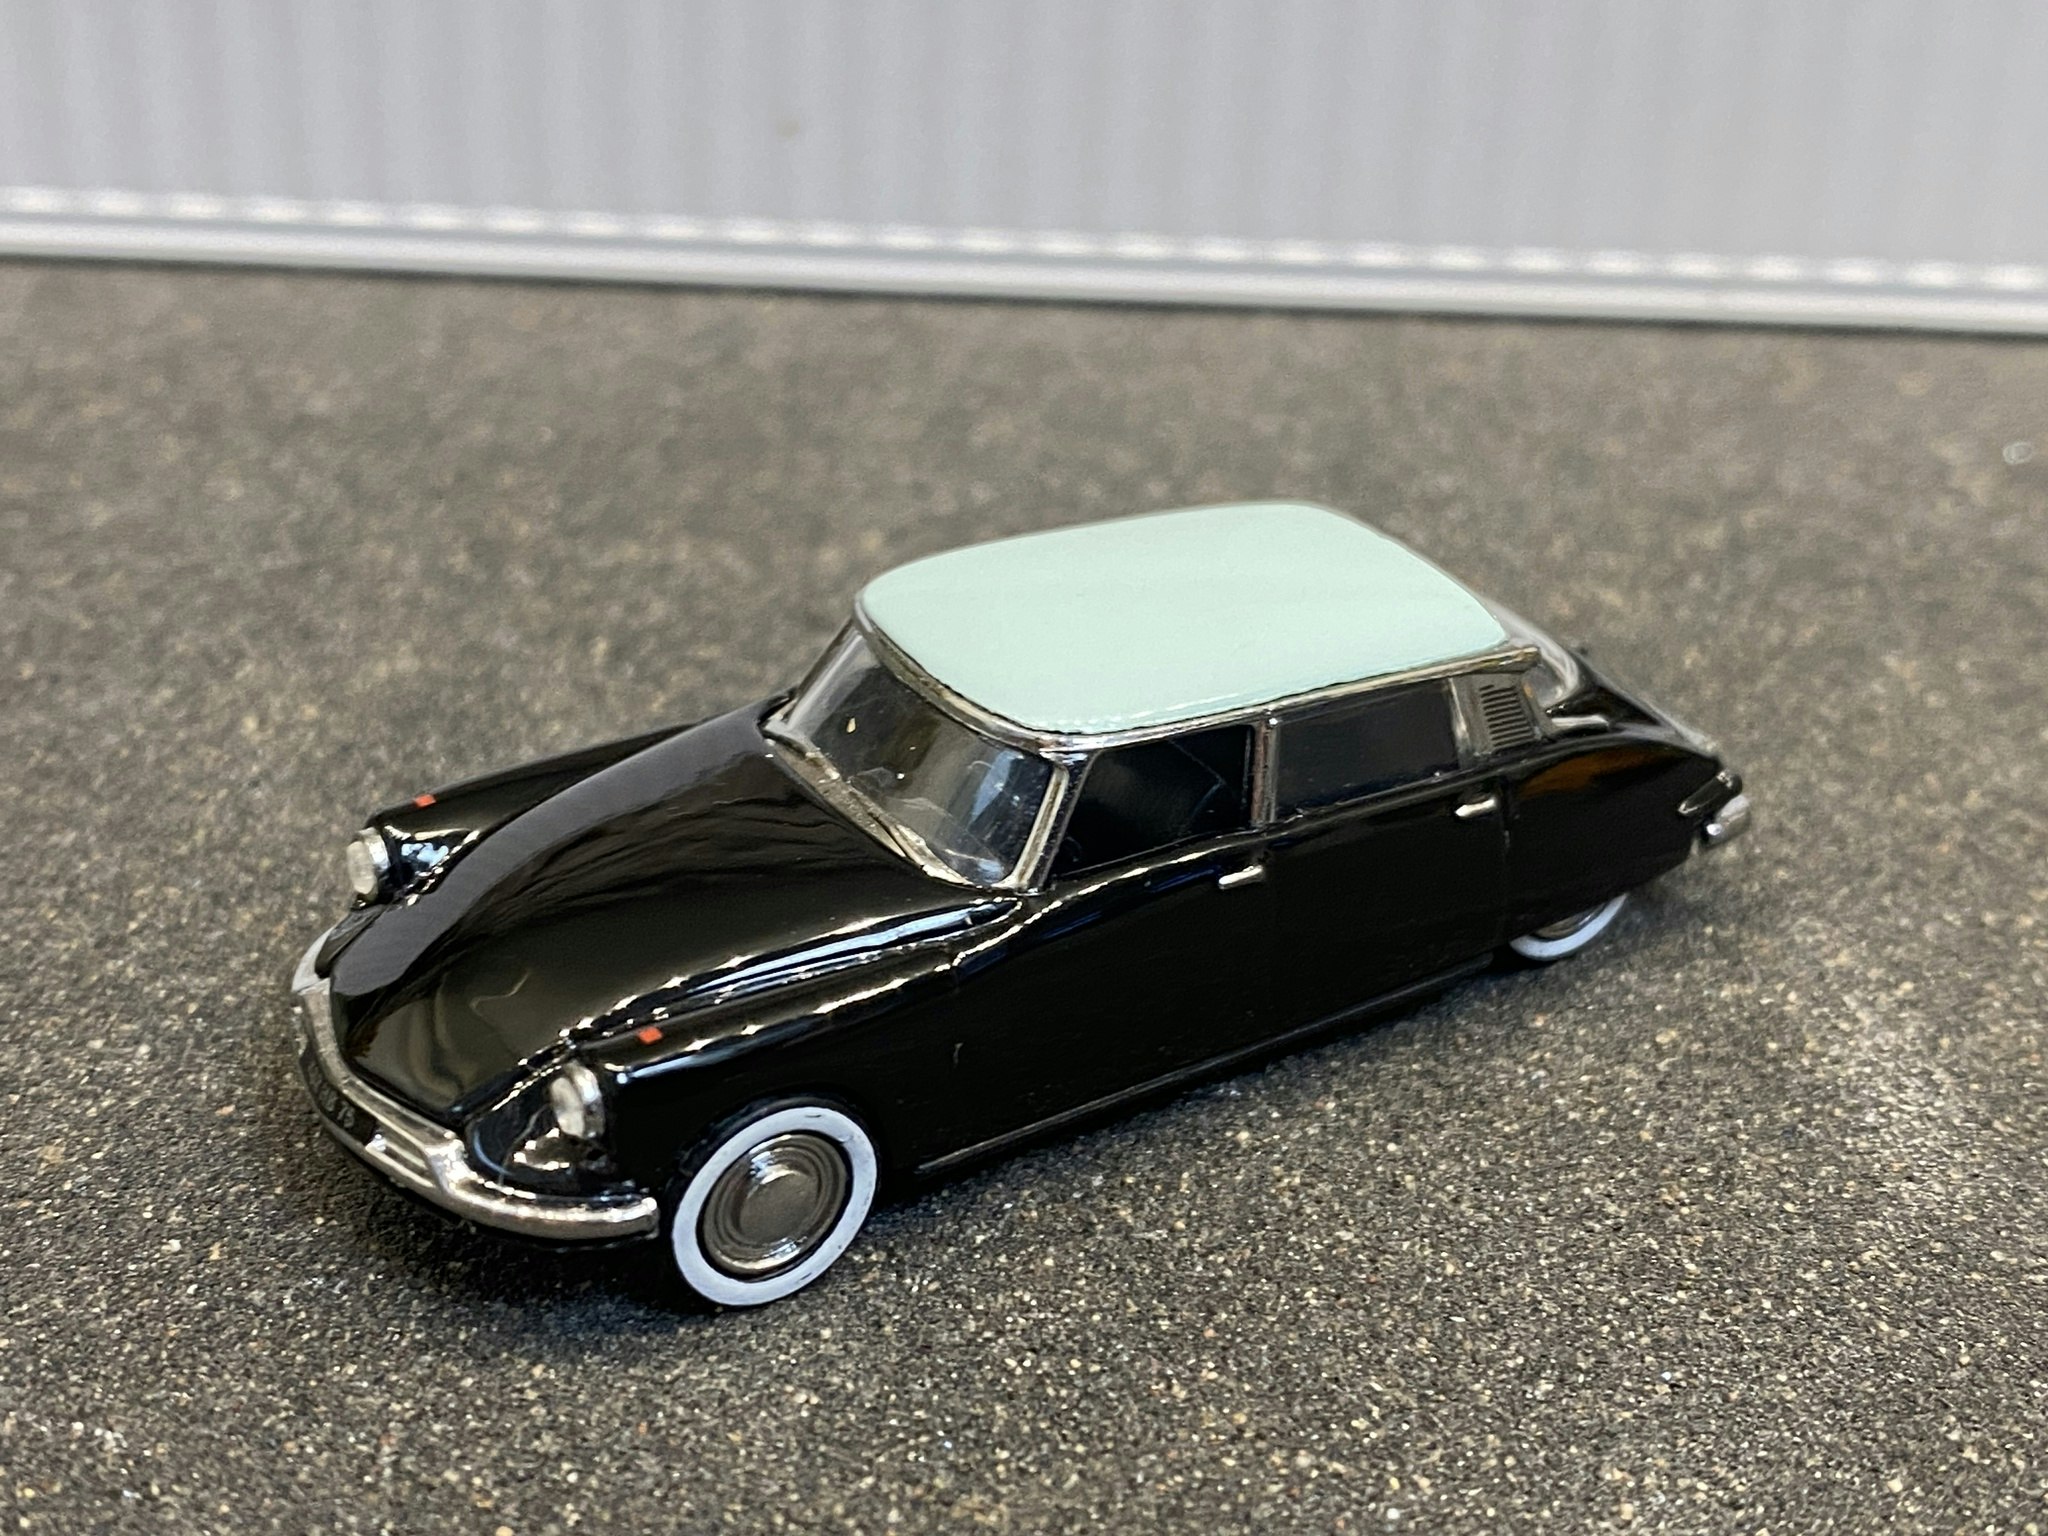 Scale 1/87 H0, Citroen ID 19 1958 Black, w mint green roof from Norev